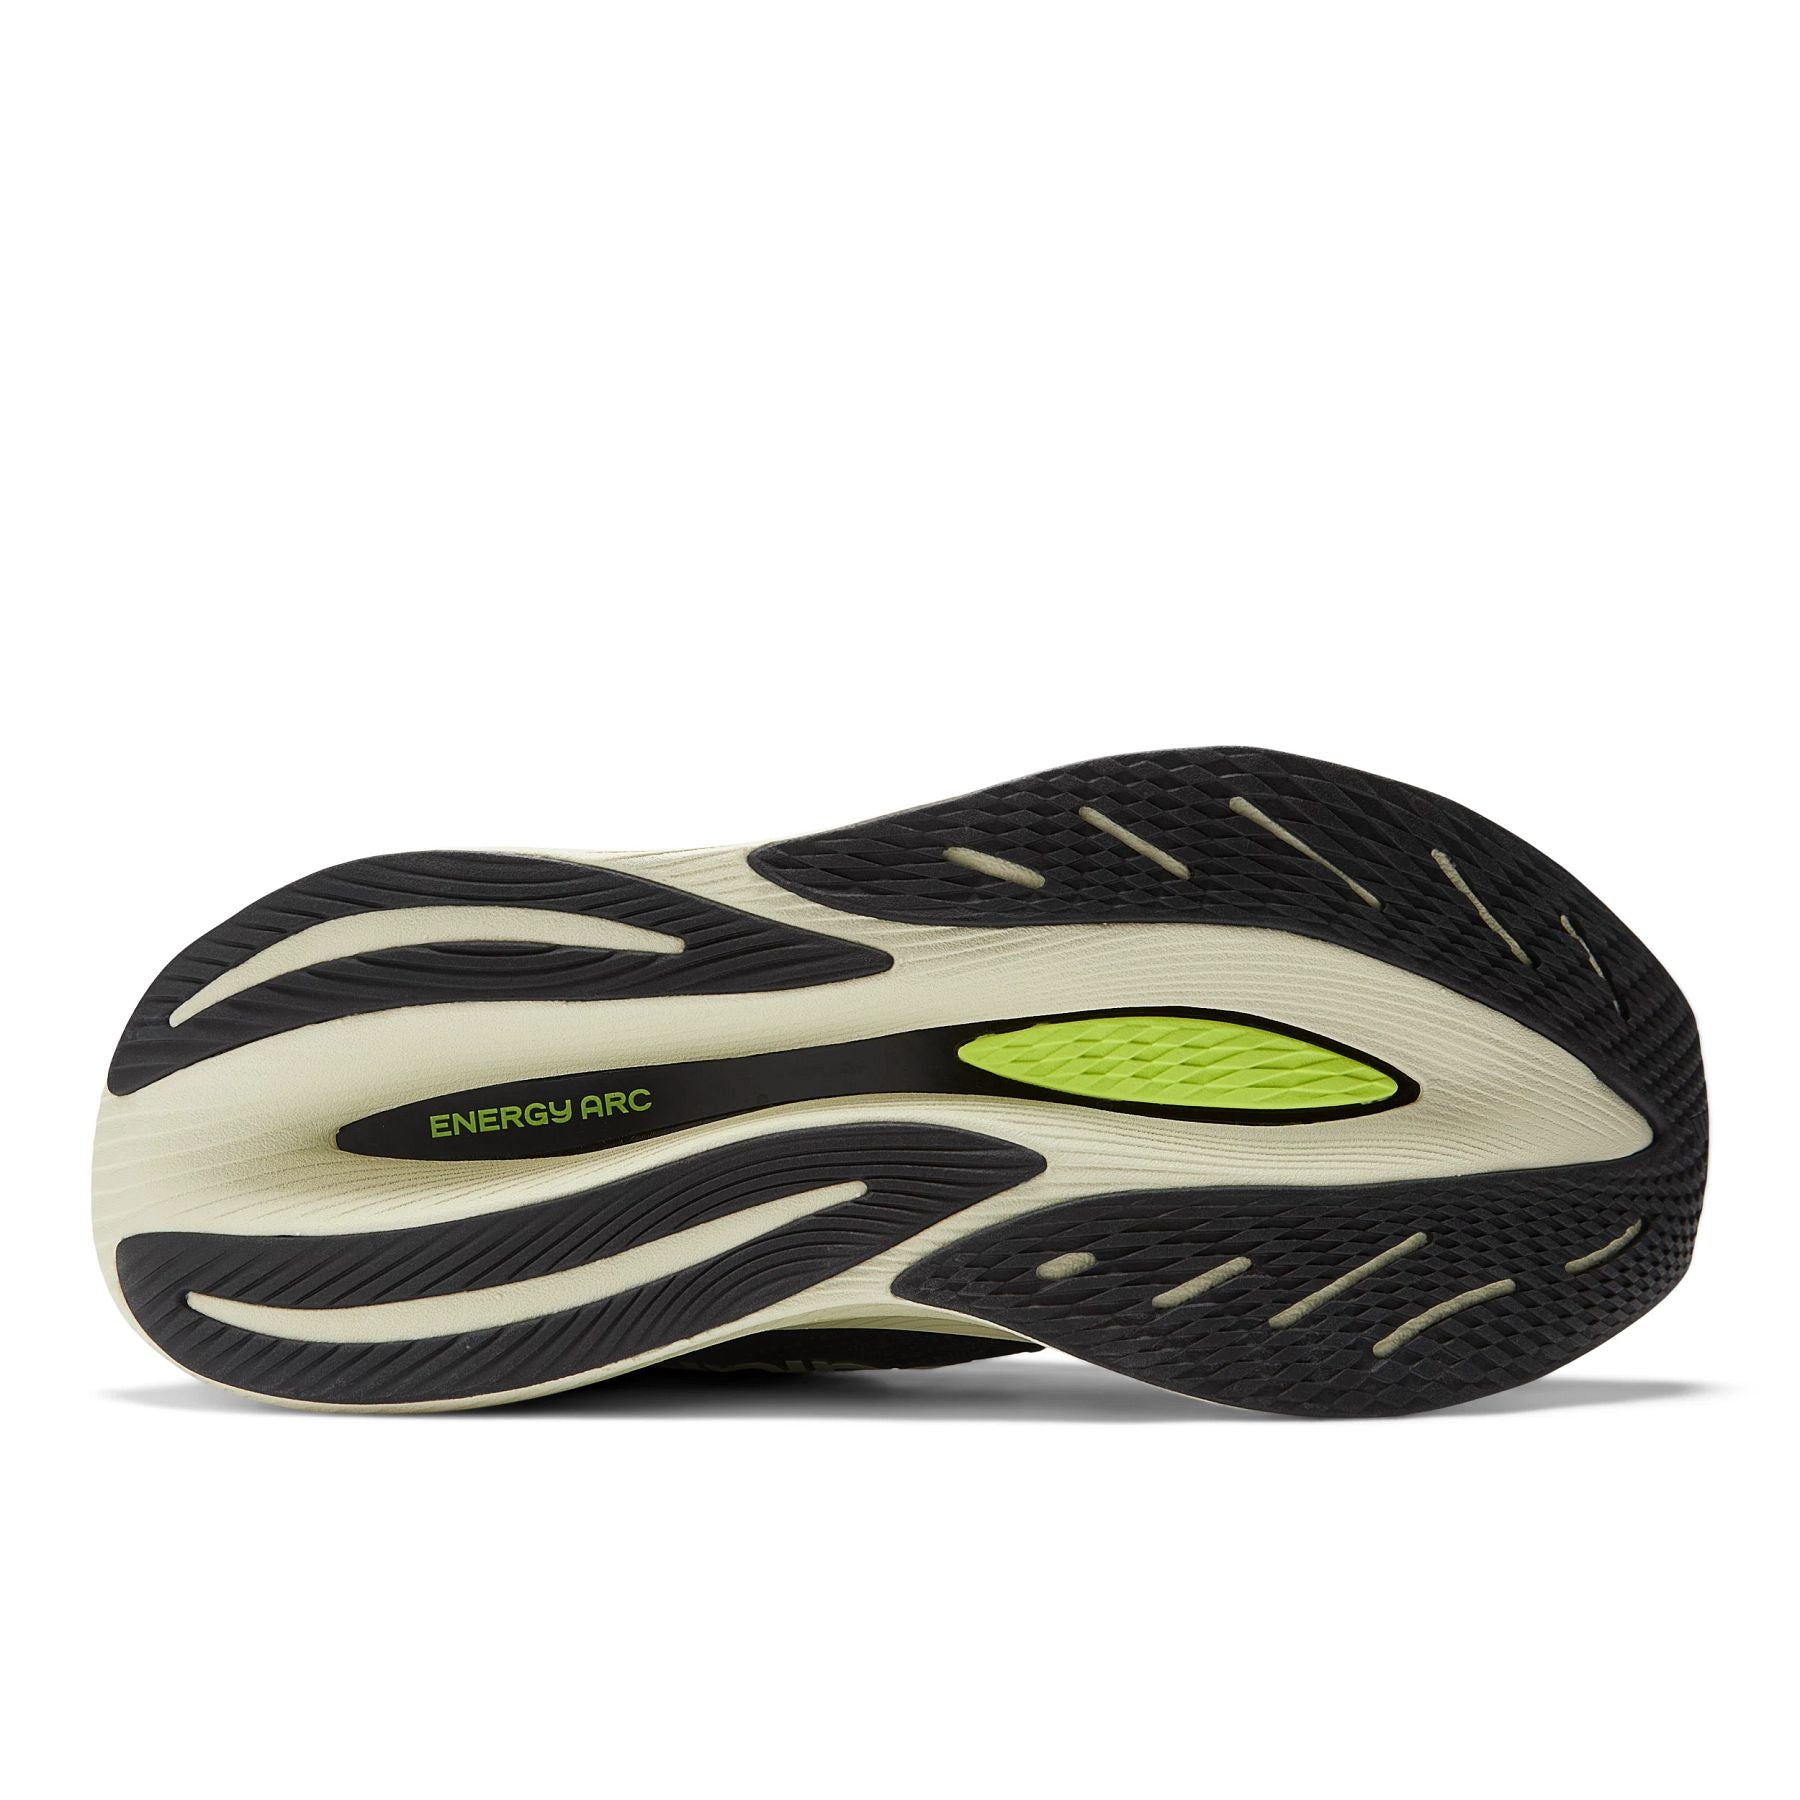 Bottom (outer sole) view of the Men's Fuel Cell SuperComp Trainer V2 in Black